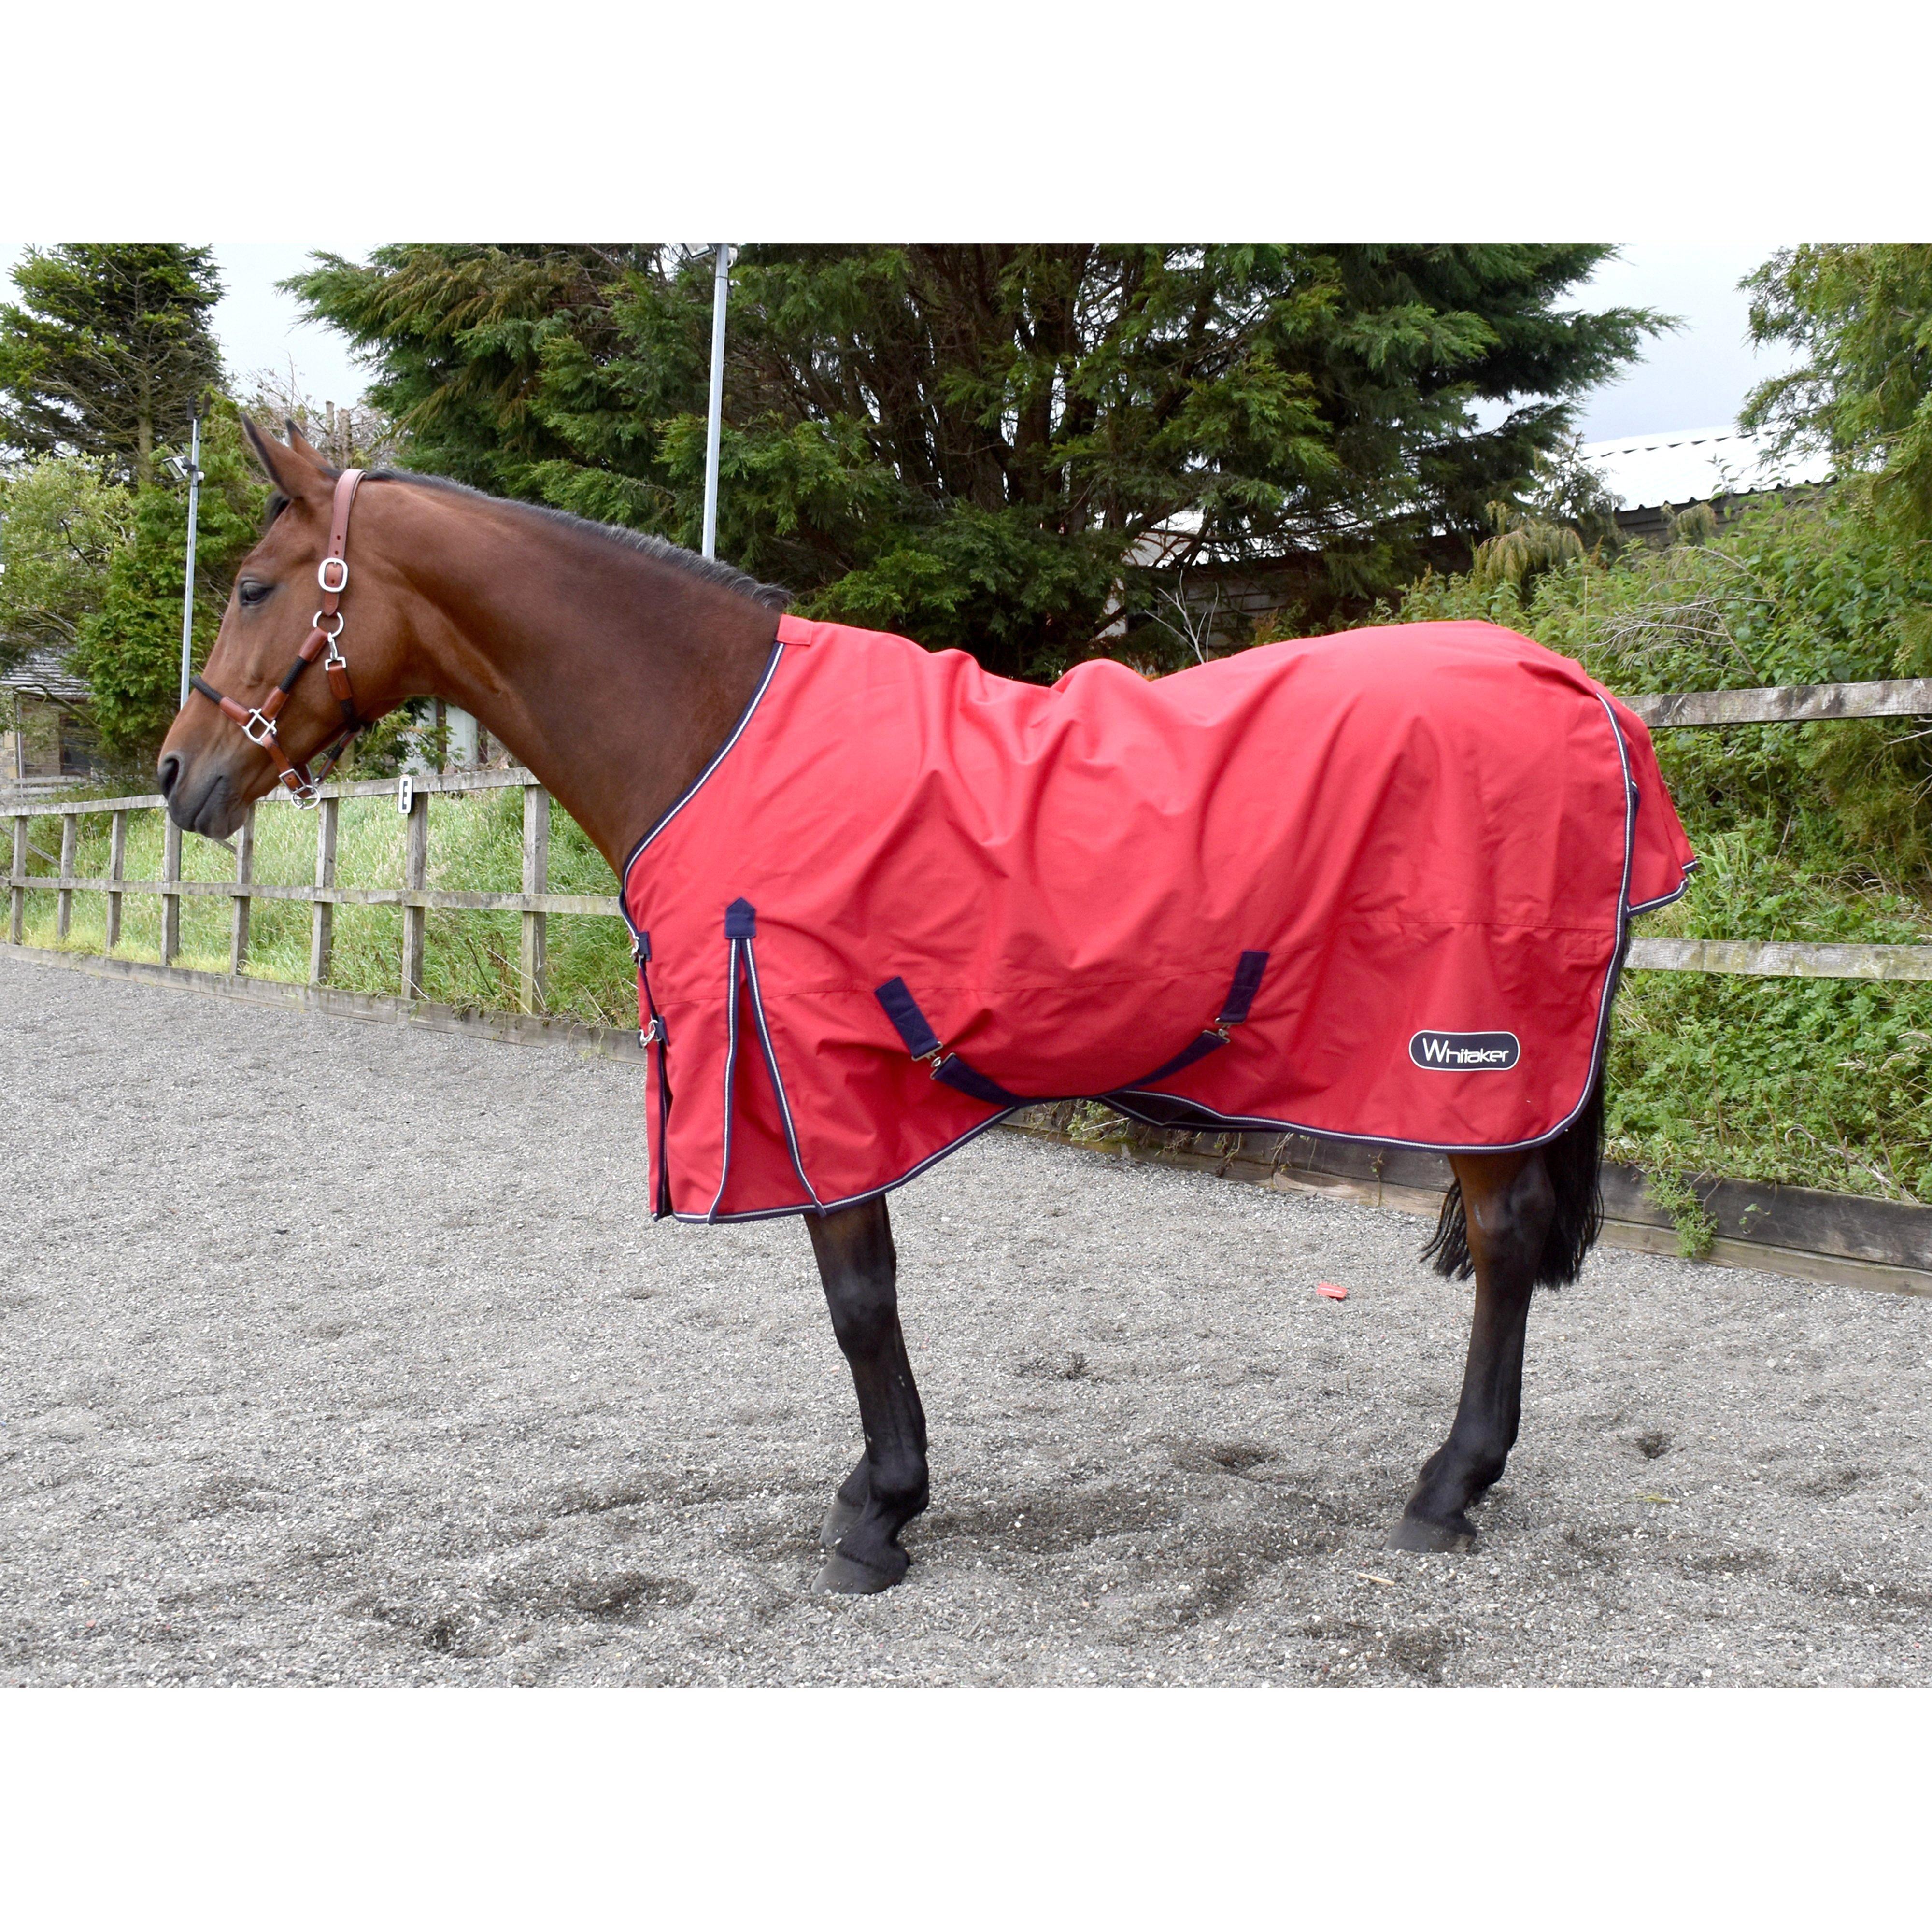 Whitaker Barrow Turnout 0g Rug Review